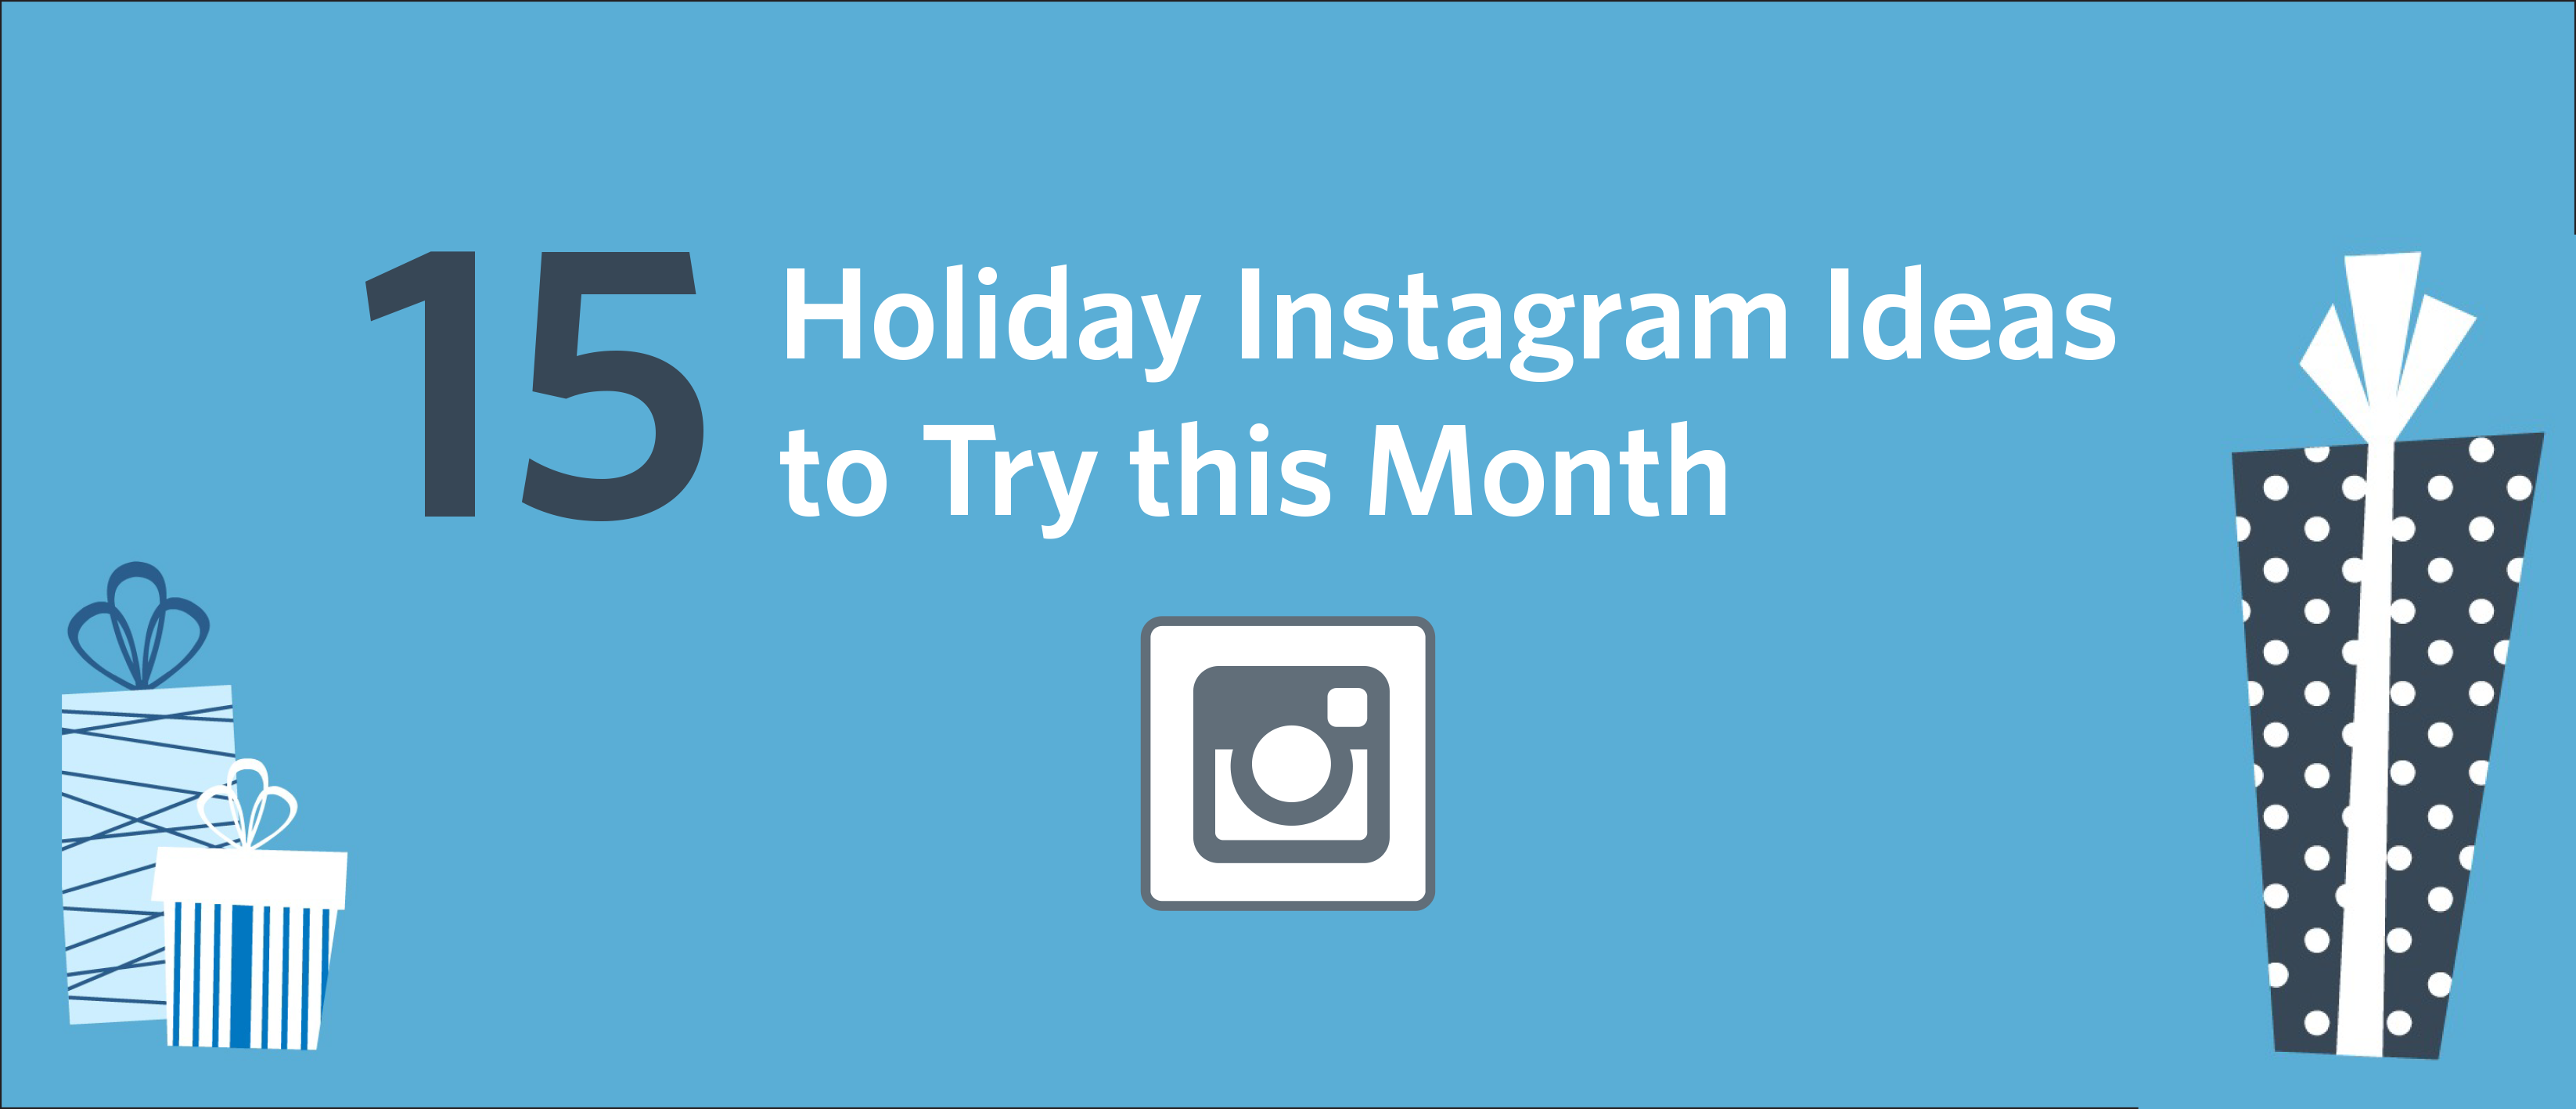 15 Holiday Instagram Ideas To Try This Month Constant Contact Blogs